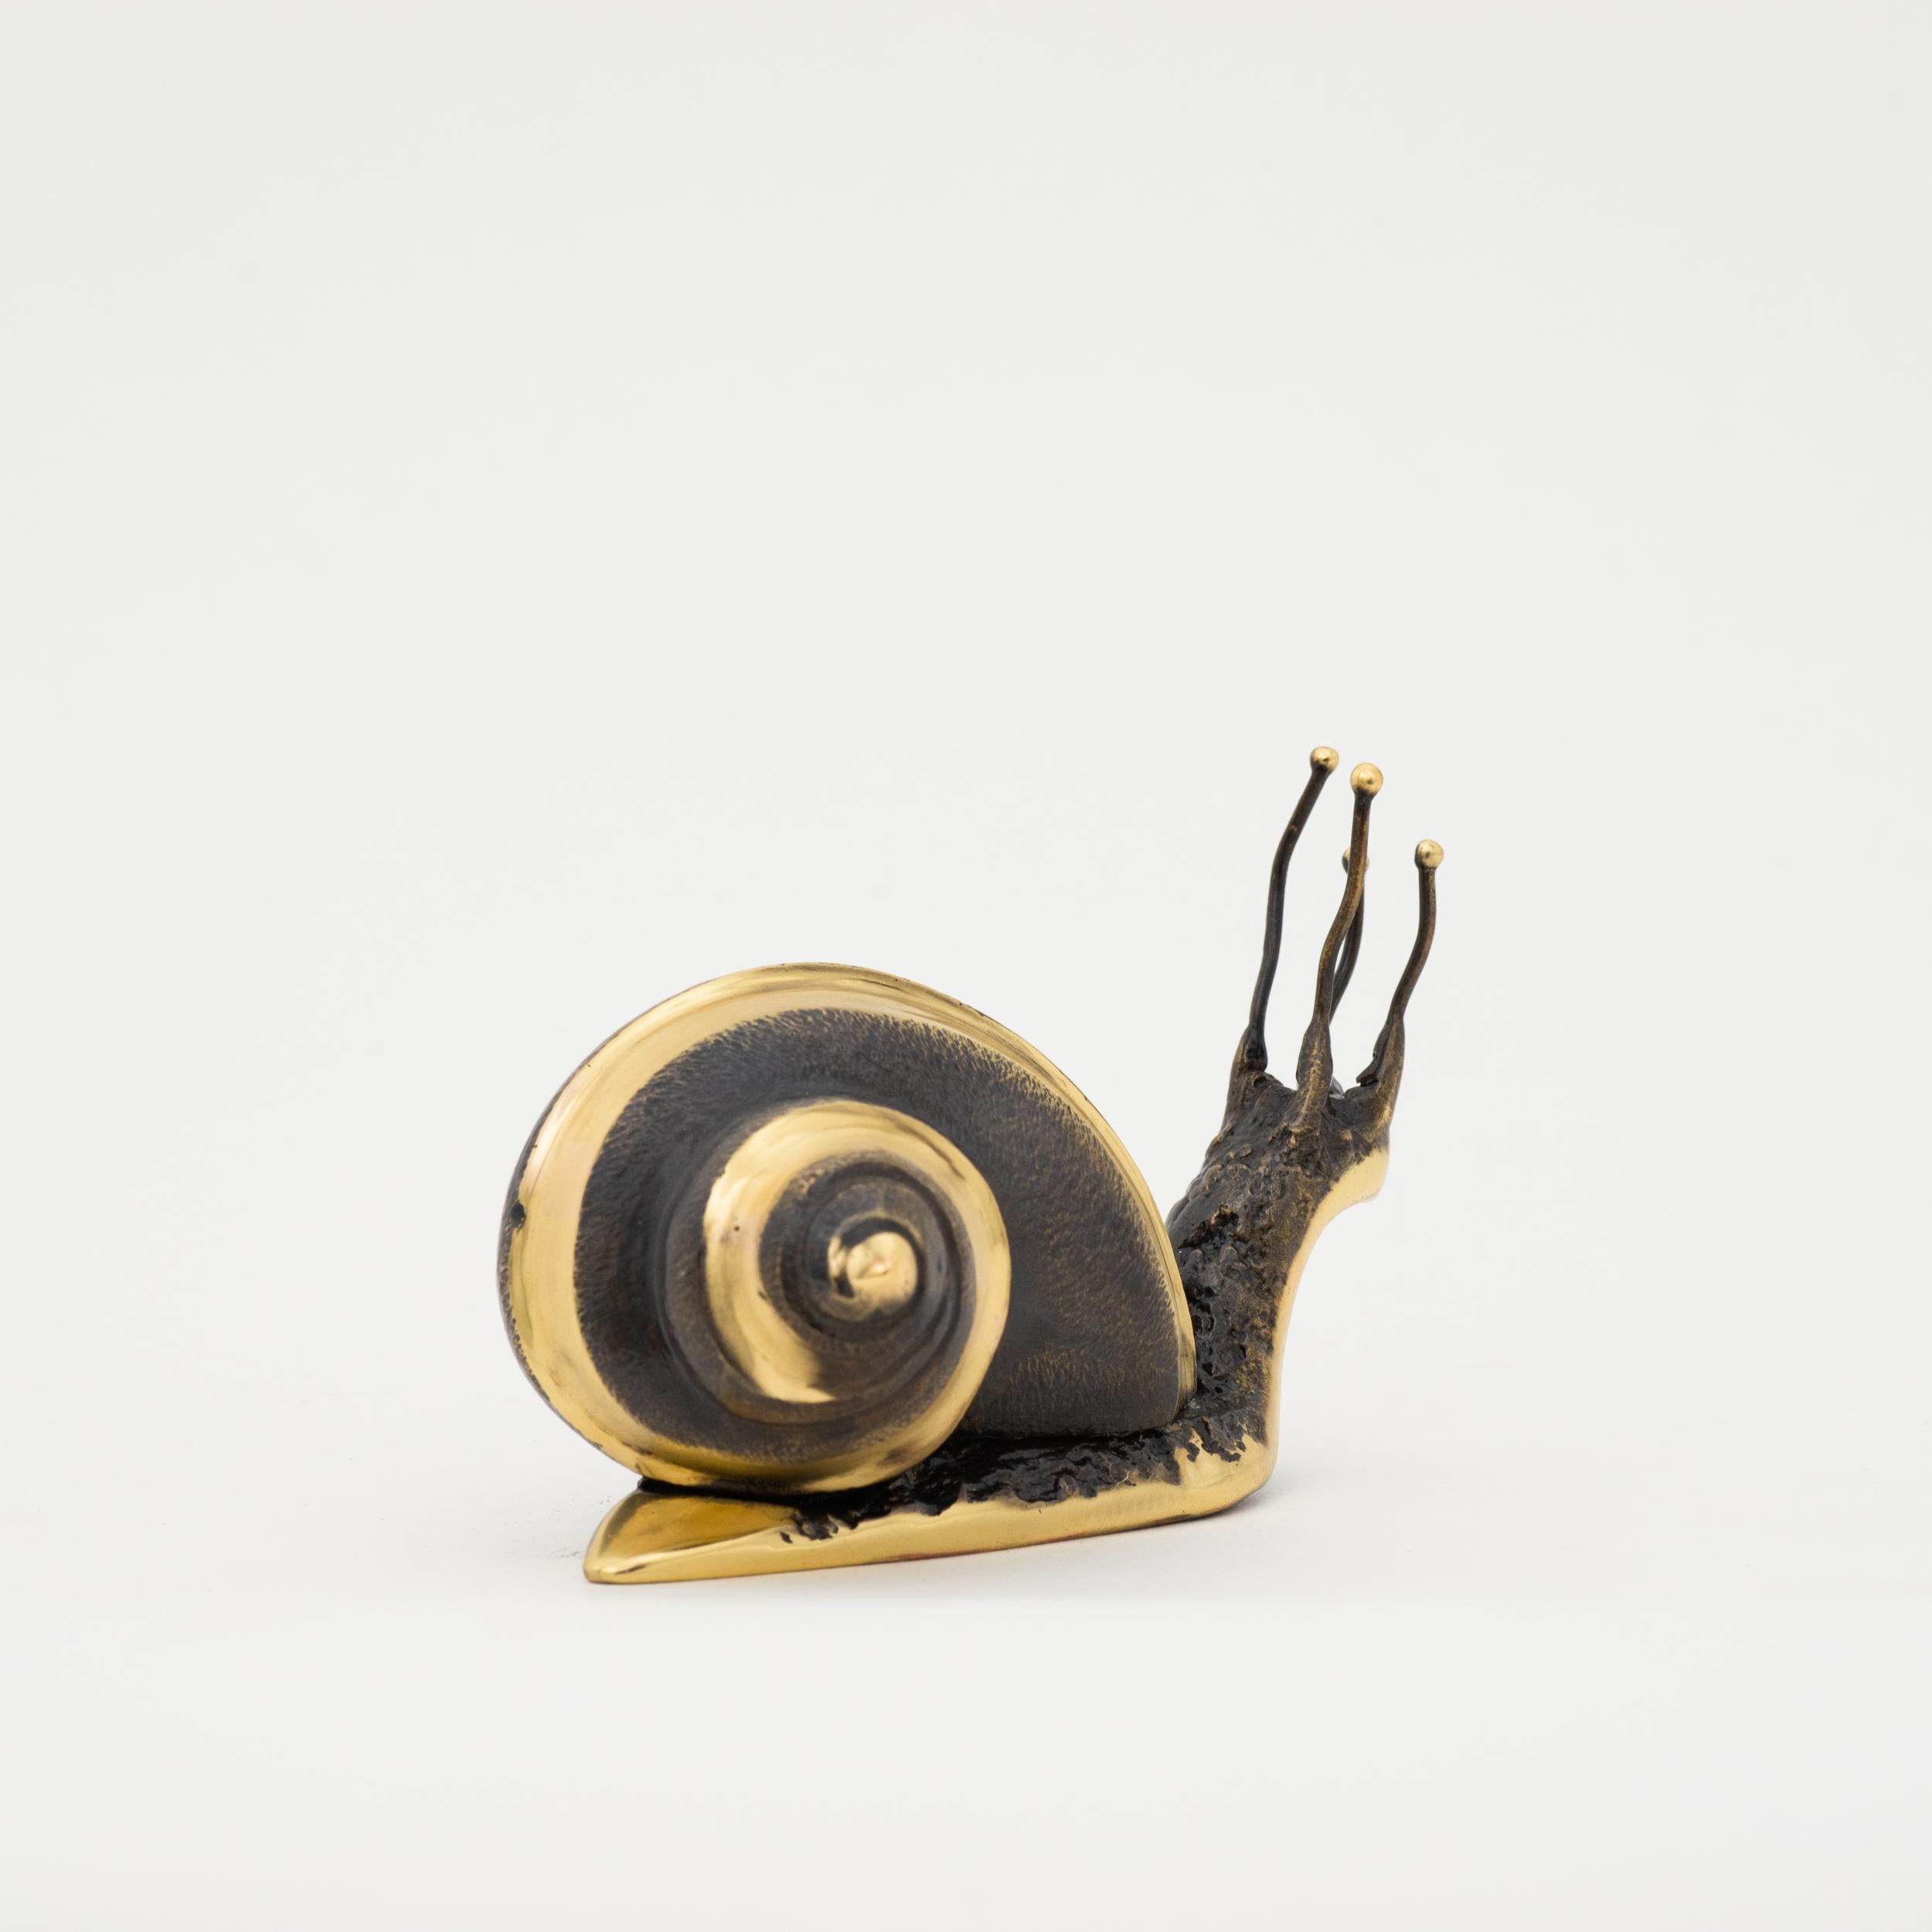 Each of these exquisite solid brass snails is handmade individually with incredible detail. Cast using very traditional techniques, the noble material is aged unveiling a beautiful patina and finished with highlights.

Slight variations in the